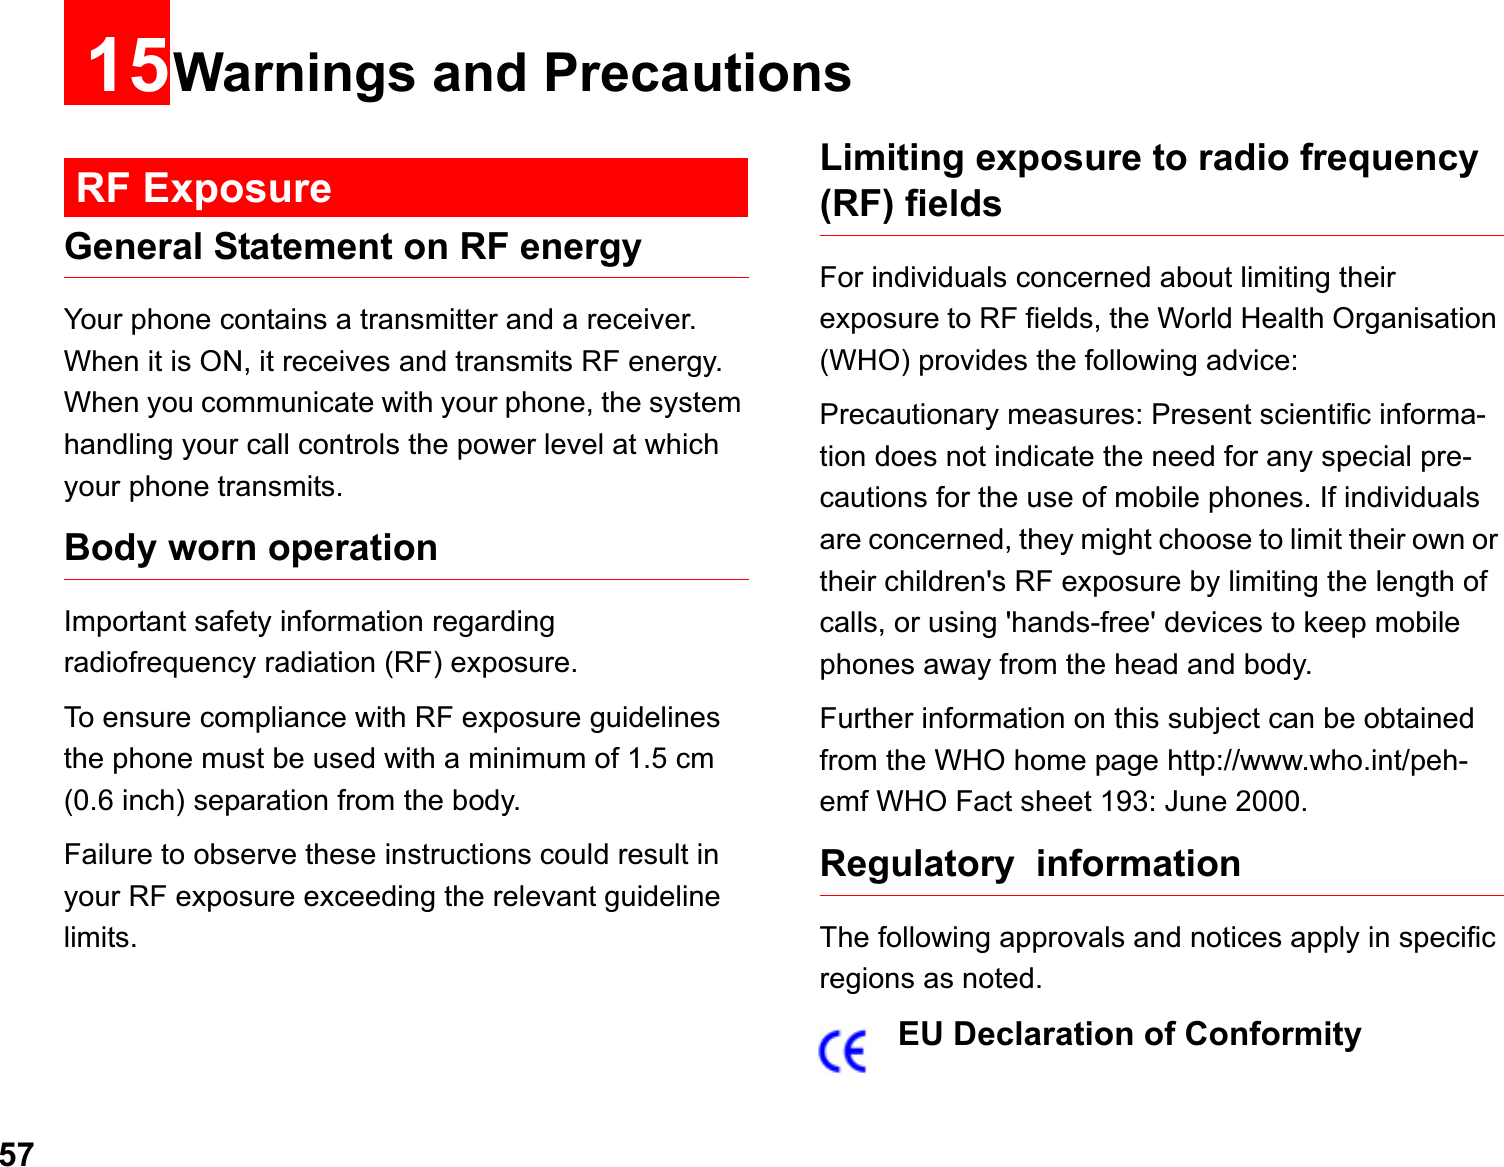 5715Warnings and PrecautionsRF ExposureGeneral Statement on RF energyYour phone contains a transmitter and a receiver. When it is ON, it receives and transmits RF energy. When you communicate with your phone, the system handling your call controls the power level at which your phone transmits.Body worn operation Important safety information regarding  radiofrequency radiation (RF) exposure. To ensure compliance with RF exposure guidelines the phone must be used with a minimum of 1.5 cm (0.6 inch) separation from the body.Failure to observe these instructions could result in your RF exposure exceeding the relevant guideline limits. Limiting exposure to radio frequency (RF) fieldsFor individuals concerned about limiting their exposure to RF fields, the World Health Organisation (WHO) provides the following advice:Precautionary measures: Present scientific informa-tion does not indicate the need for any special pre-cautions for the use of mobile phones. If individuals are concerned, they might choose to limit their own or their children&apos;s RF exposure by limiting the length of calls, or using &apos;hands-free&apos; devices to keep mobile phones away from the head and body.Further information on this subject can be obtained from the WHO home page http://www.who.int/peh-emf WHO Fact sheet 193: June 2000.Regulatory  informationThe following approvals and notices apply in specific regions as noted.EU Declaration of Conformity